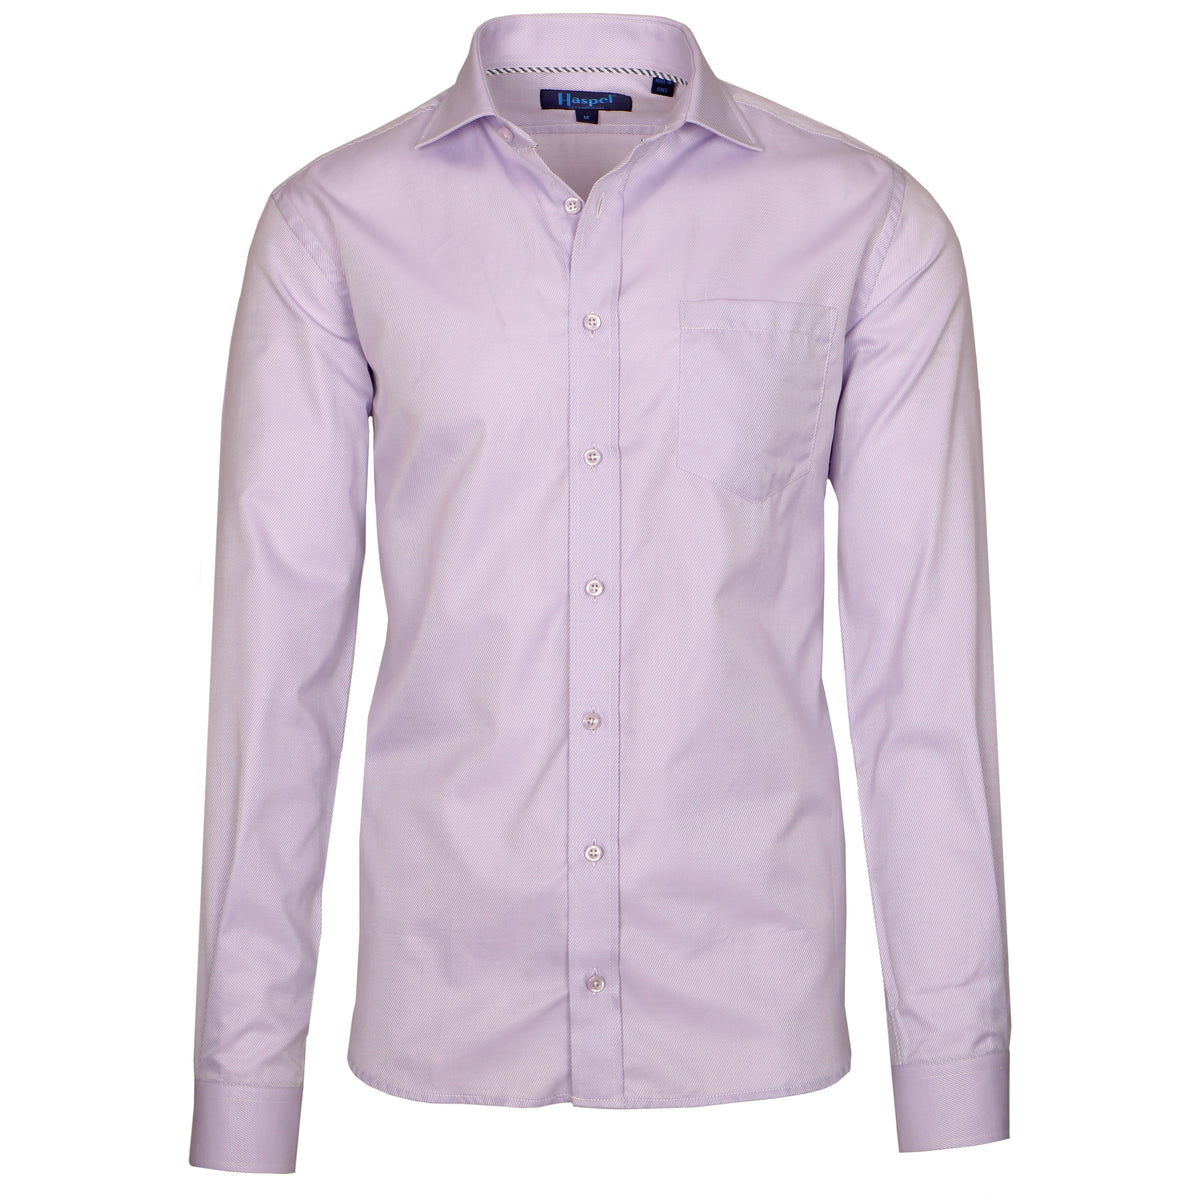 Relax in our cottony perfection in soft lavender. Purple in pastel hue is the perfect juxtaposition to your rugged good looks.  100% Cotton  •  Long Sleeve  •  Spread Collar  •  Chest Pocket  •  Button Cuff  •  Machine Washable  •  Made in Italy Return Policy